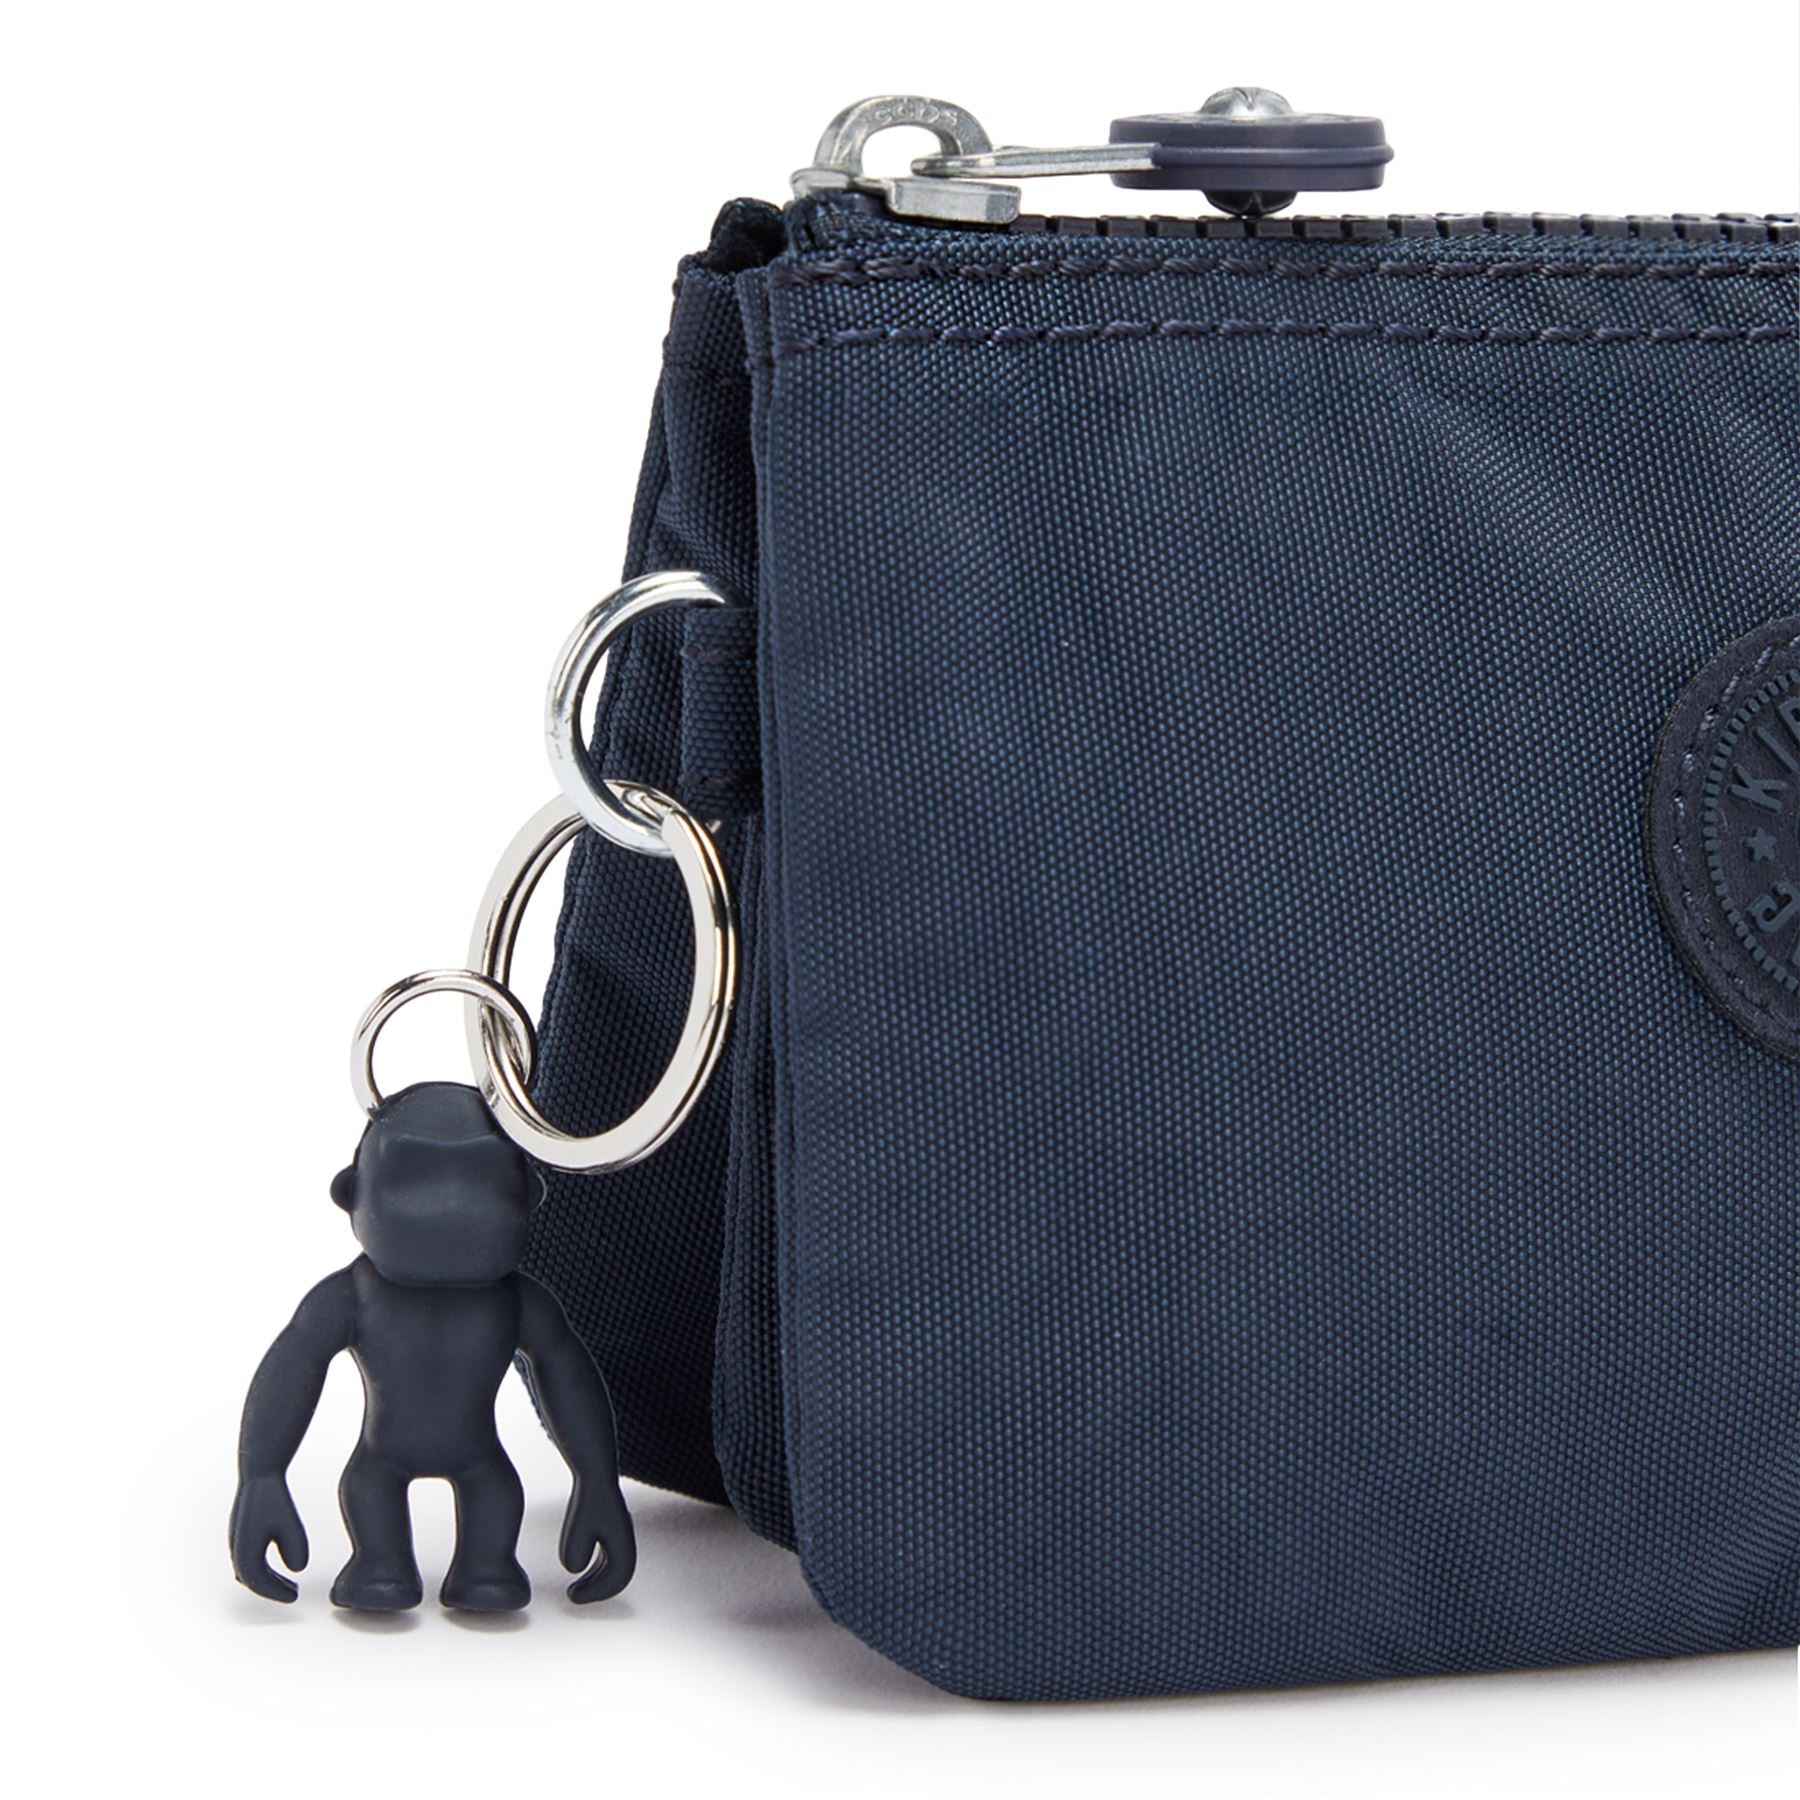 KIPLING SMALL BLACK MOSI COIN POUCH PURSE FROM G*RILLA GIRLZ COLLECTION  BNWT | eBay